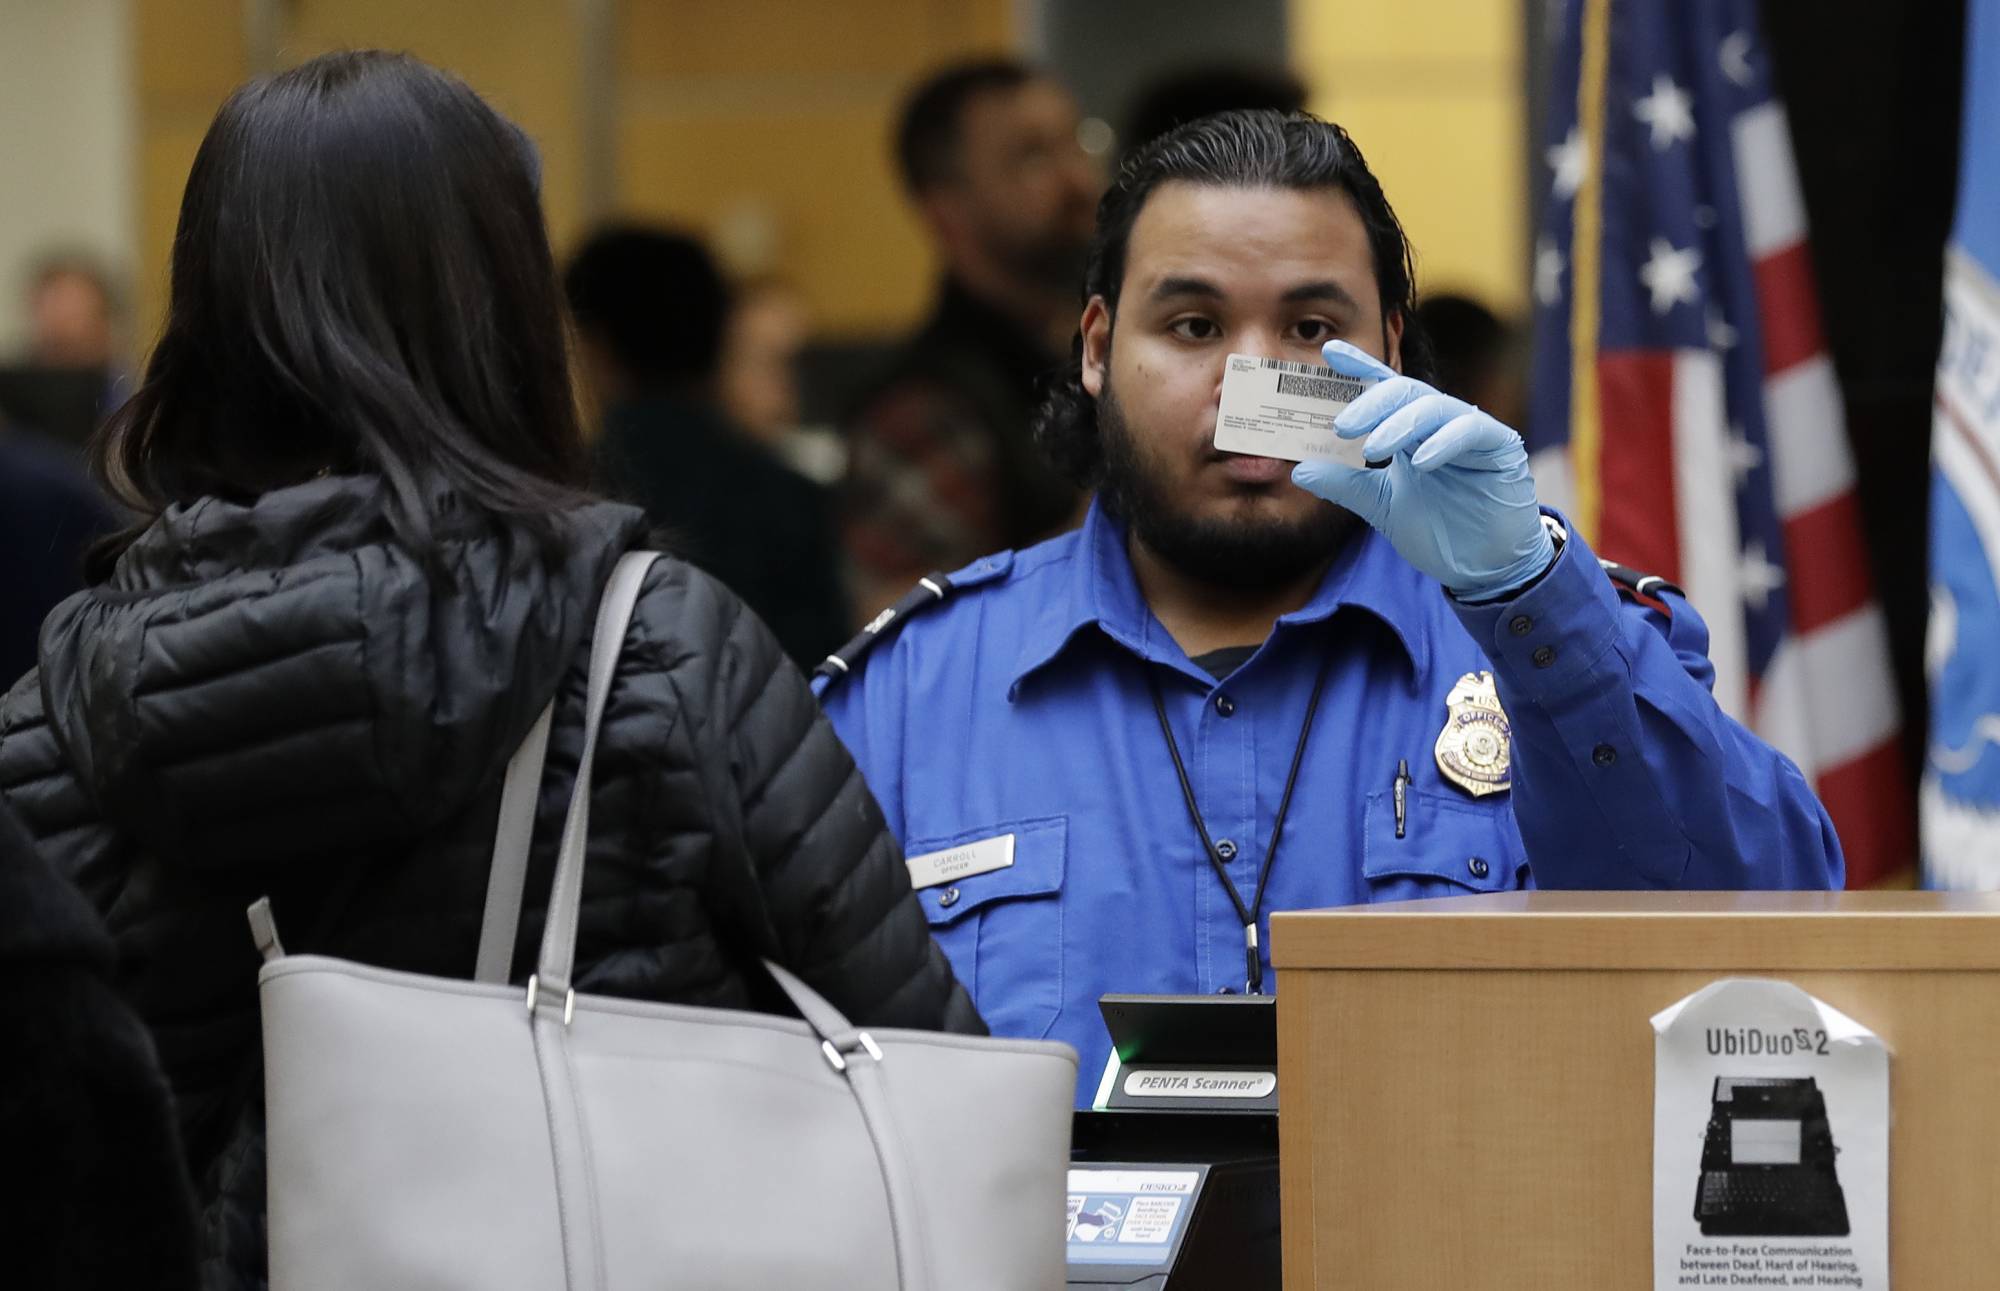 A TSA worker checks an identification card, Friday, Jan. 25, 2019, at Seattle-Tacoma International Airport in Seattle. Yielding to mounting pressure and growing disruption, President Donald Trump and congressional leaders on Friday reached a short-term deal to reopen the government for three weeks while negotiations continue over the president's demands for money to build his long-promised wall at the U.S.-Mexico border. (AP Photo/Ted S. Warren)